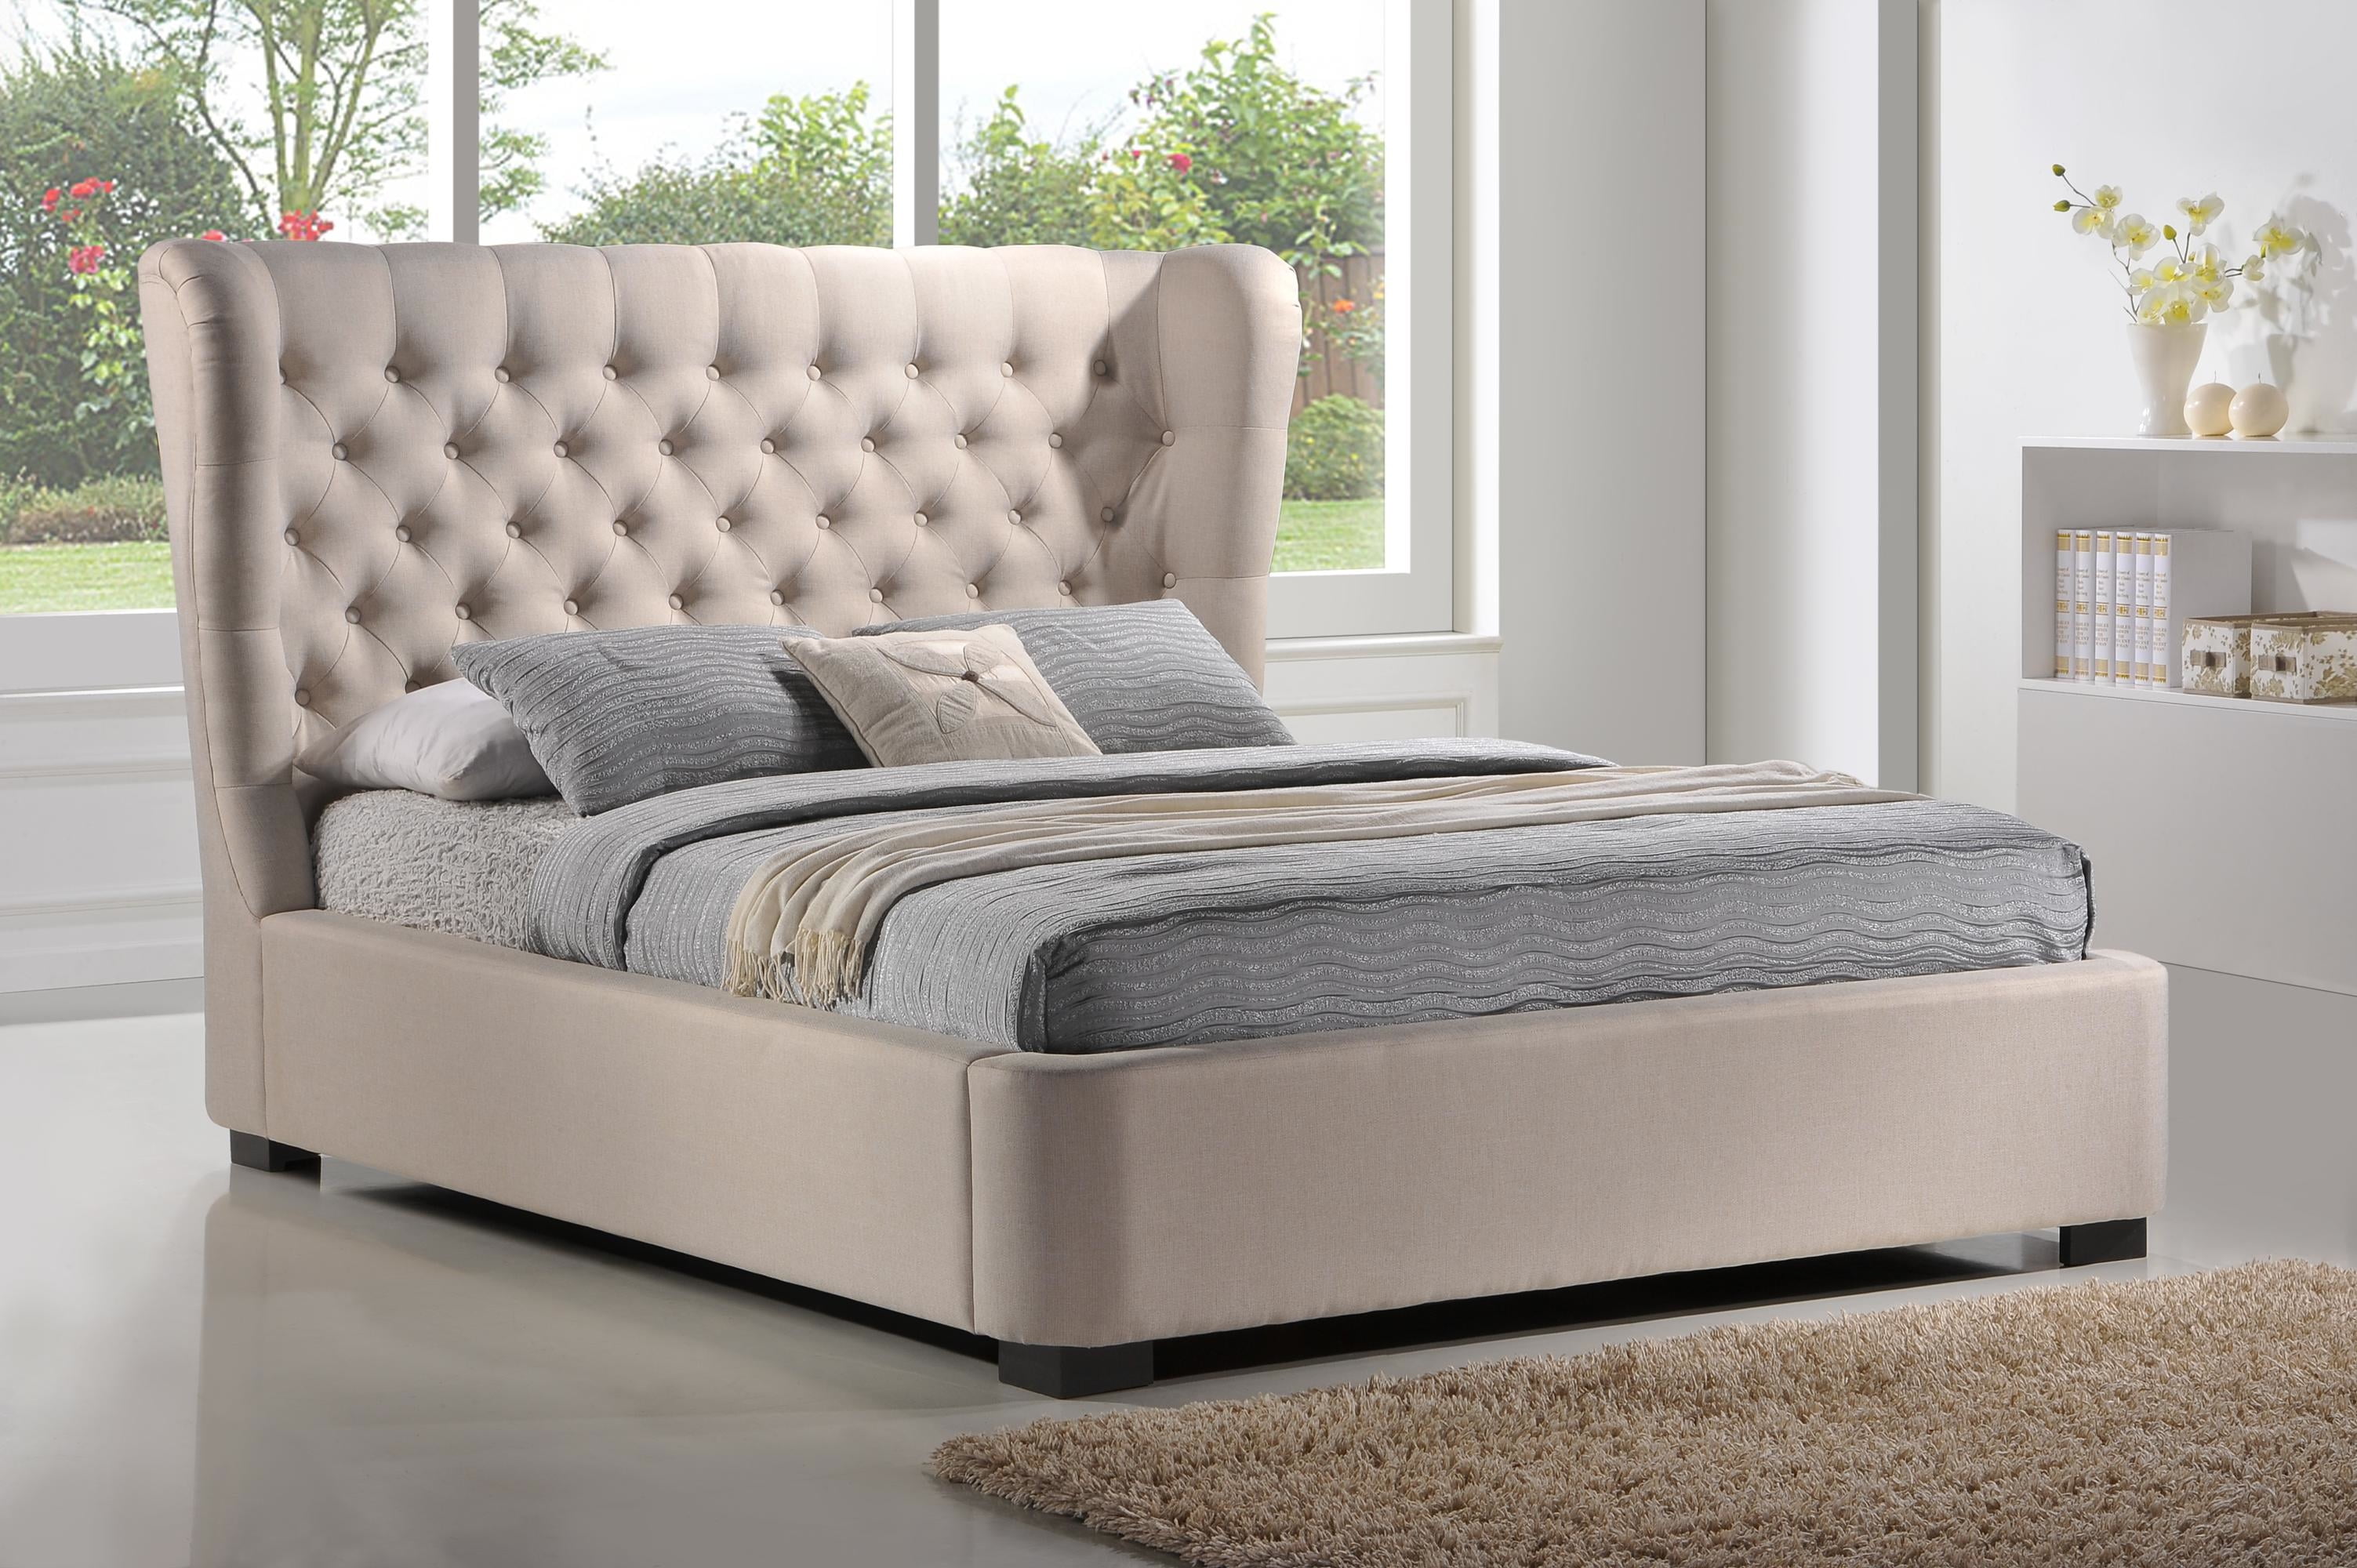 seli mattress prices king size bed